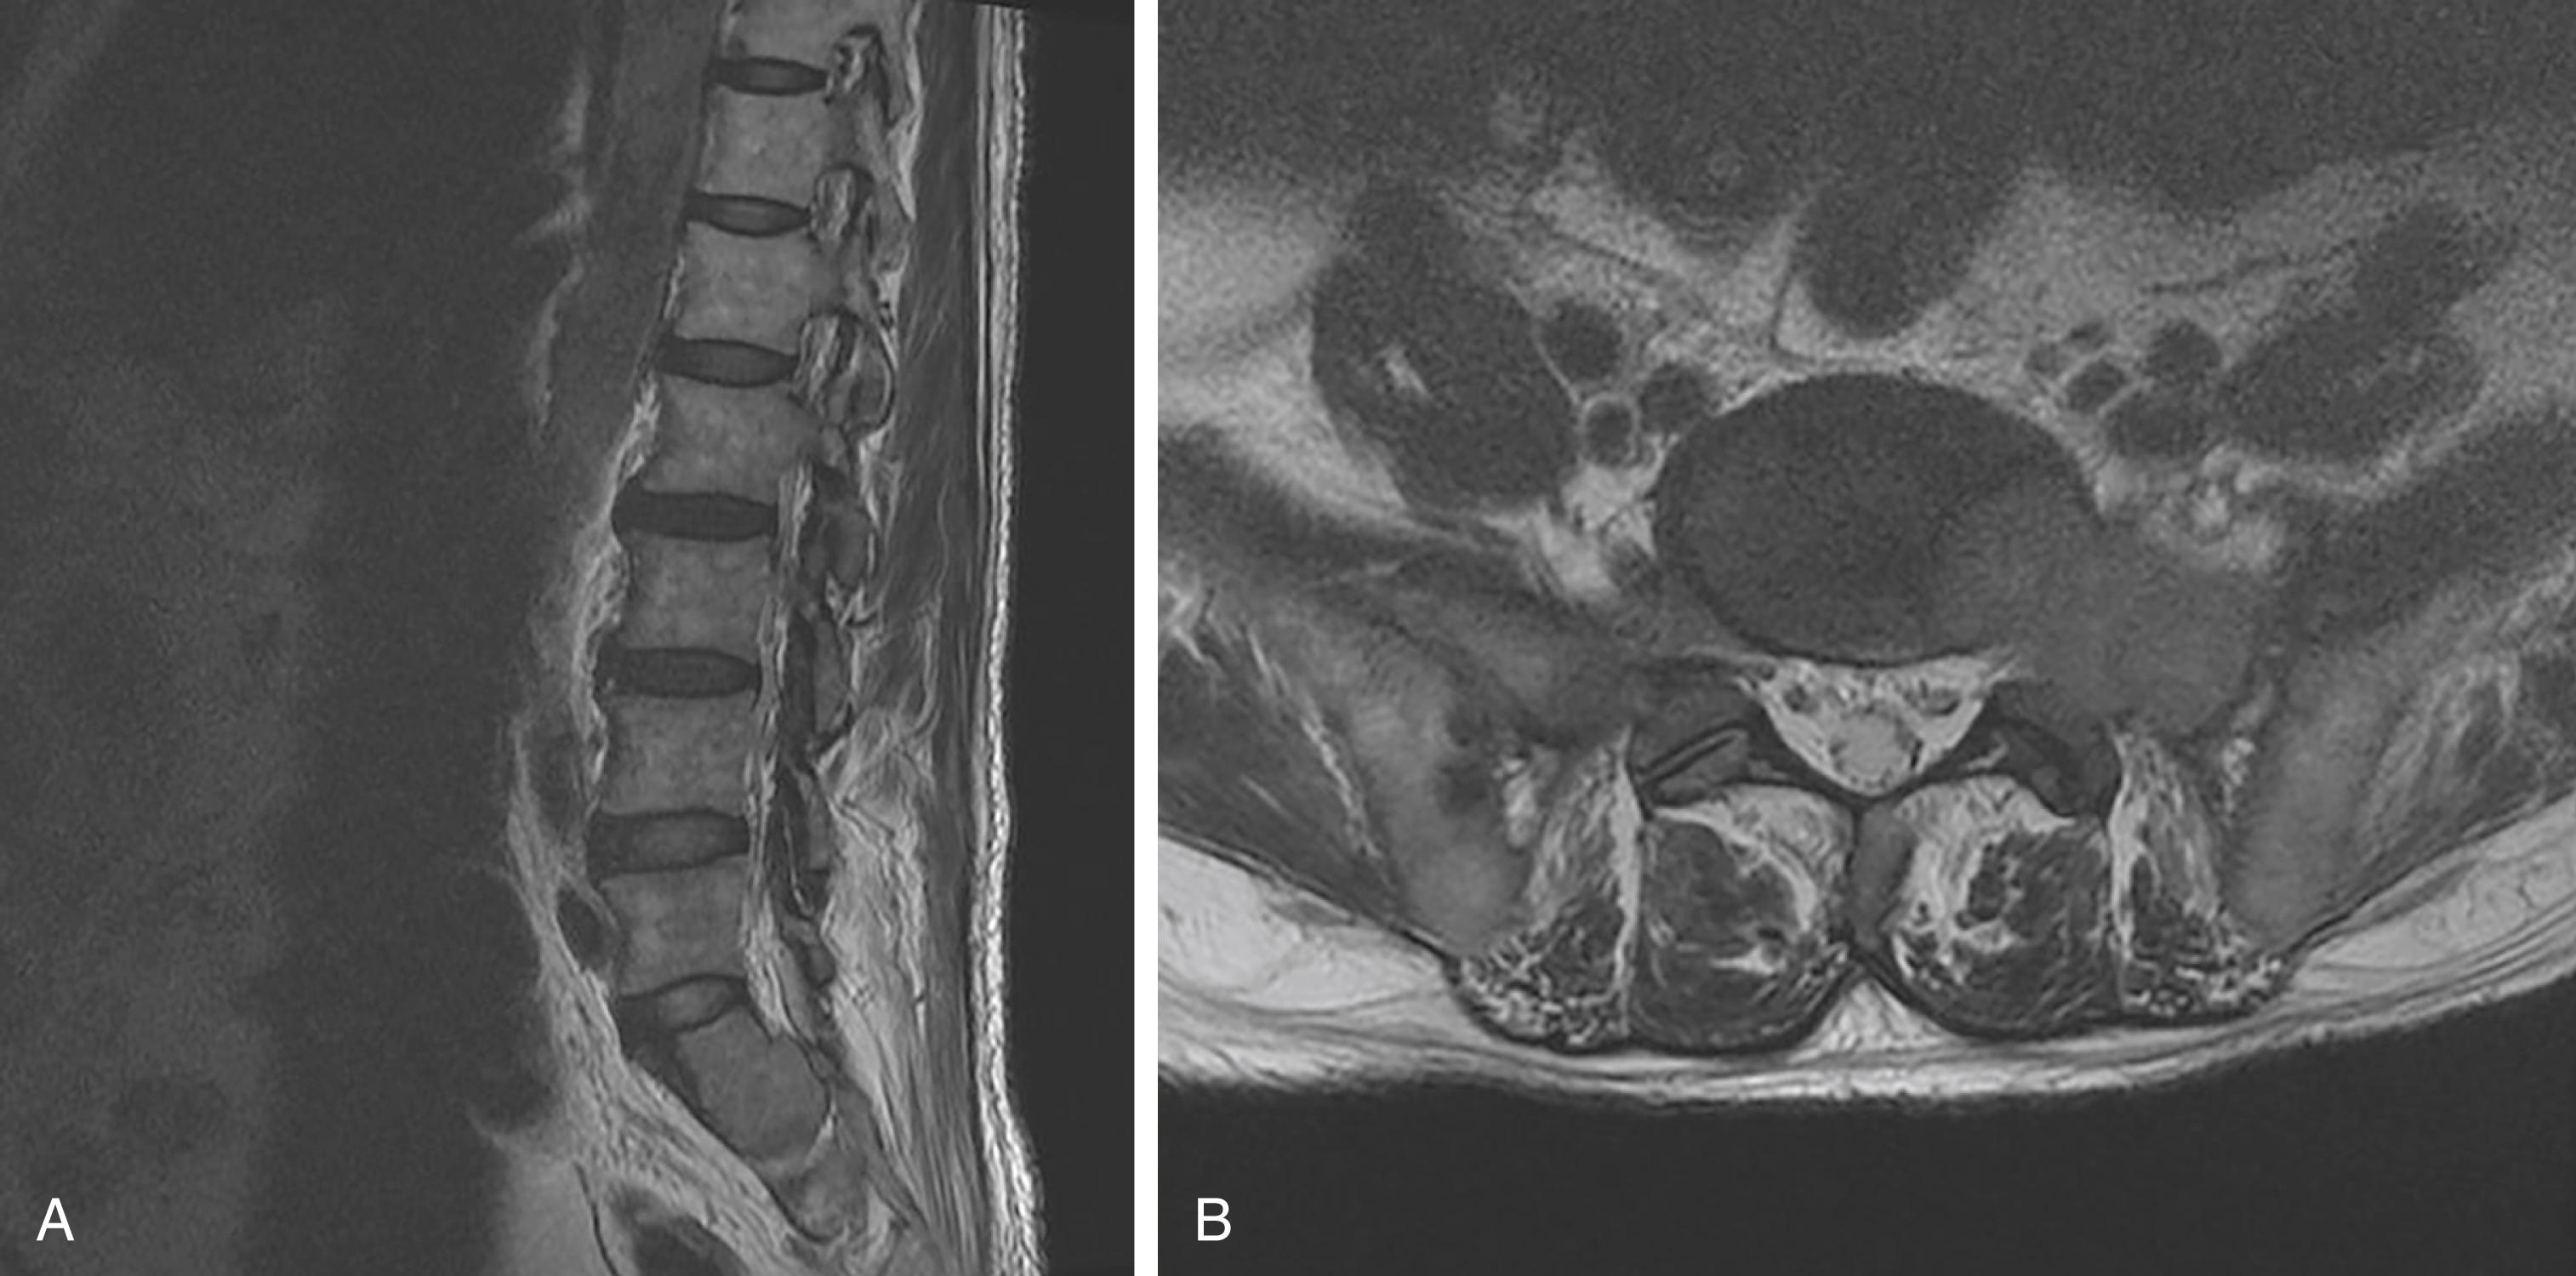 Fig. 158.1, A 69-year-old male patient with a history of hepatocellular carcinoma presented with upper left-sided thigh pain, sharp, radiating down the leg. T2-weighted magnetic resonance imaging from ( A ) sagittal and ( B ) axial views showing expansile metastatic lesion in the left aspect of the sacrum with soft tissue component and cortical breakthrough with extension into left S1 neural foramen.